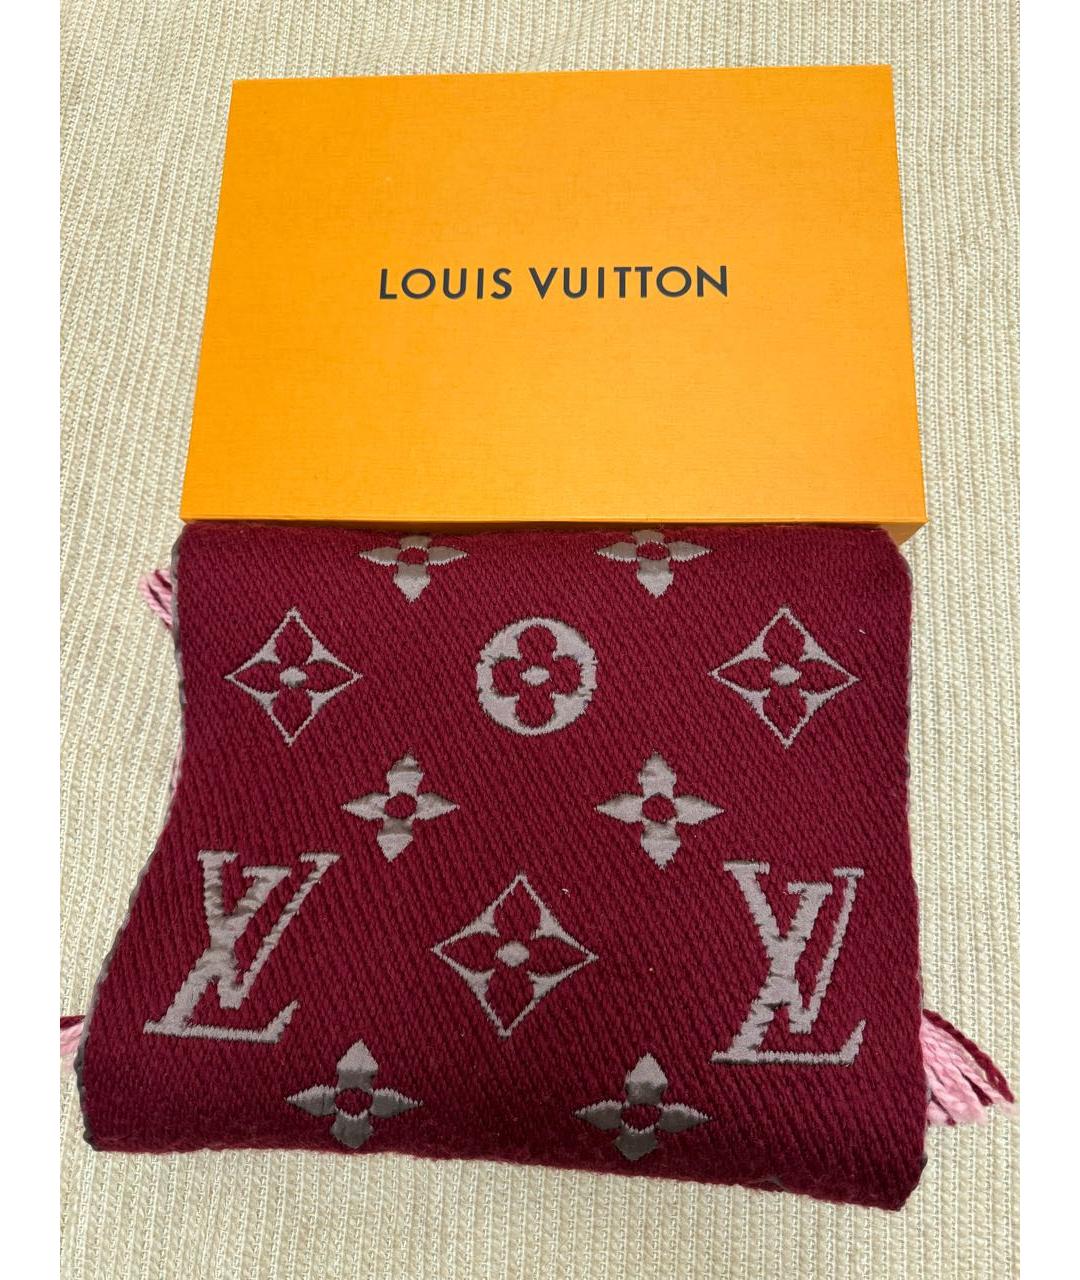 LOUIS VUITTON PRE-OWNED Бордовый шерстяной шарф, фото 3